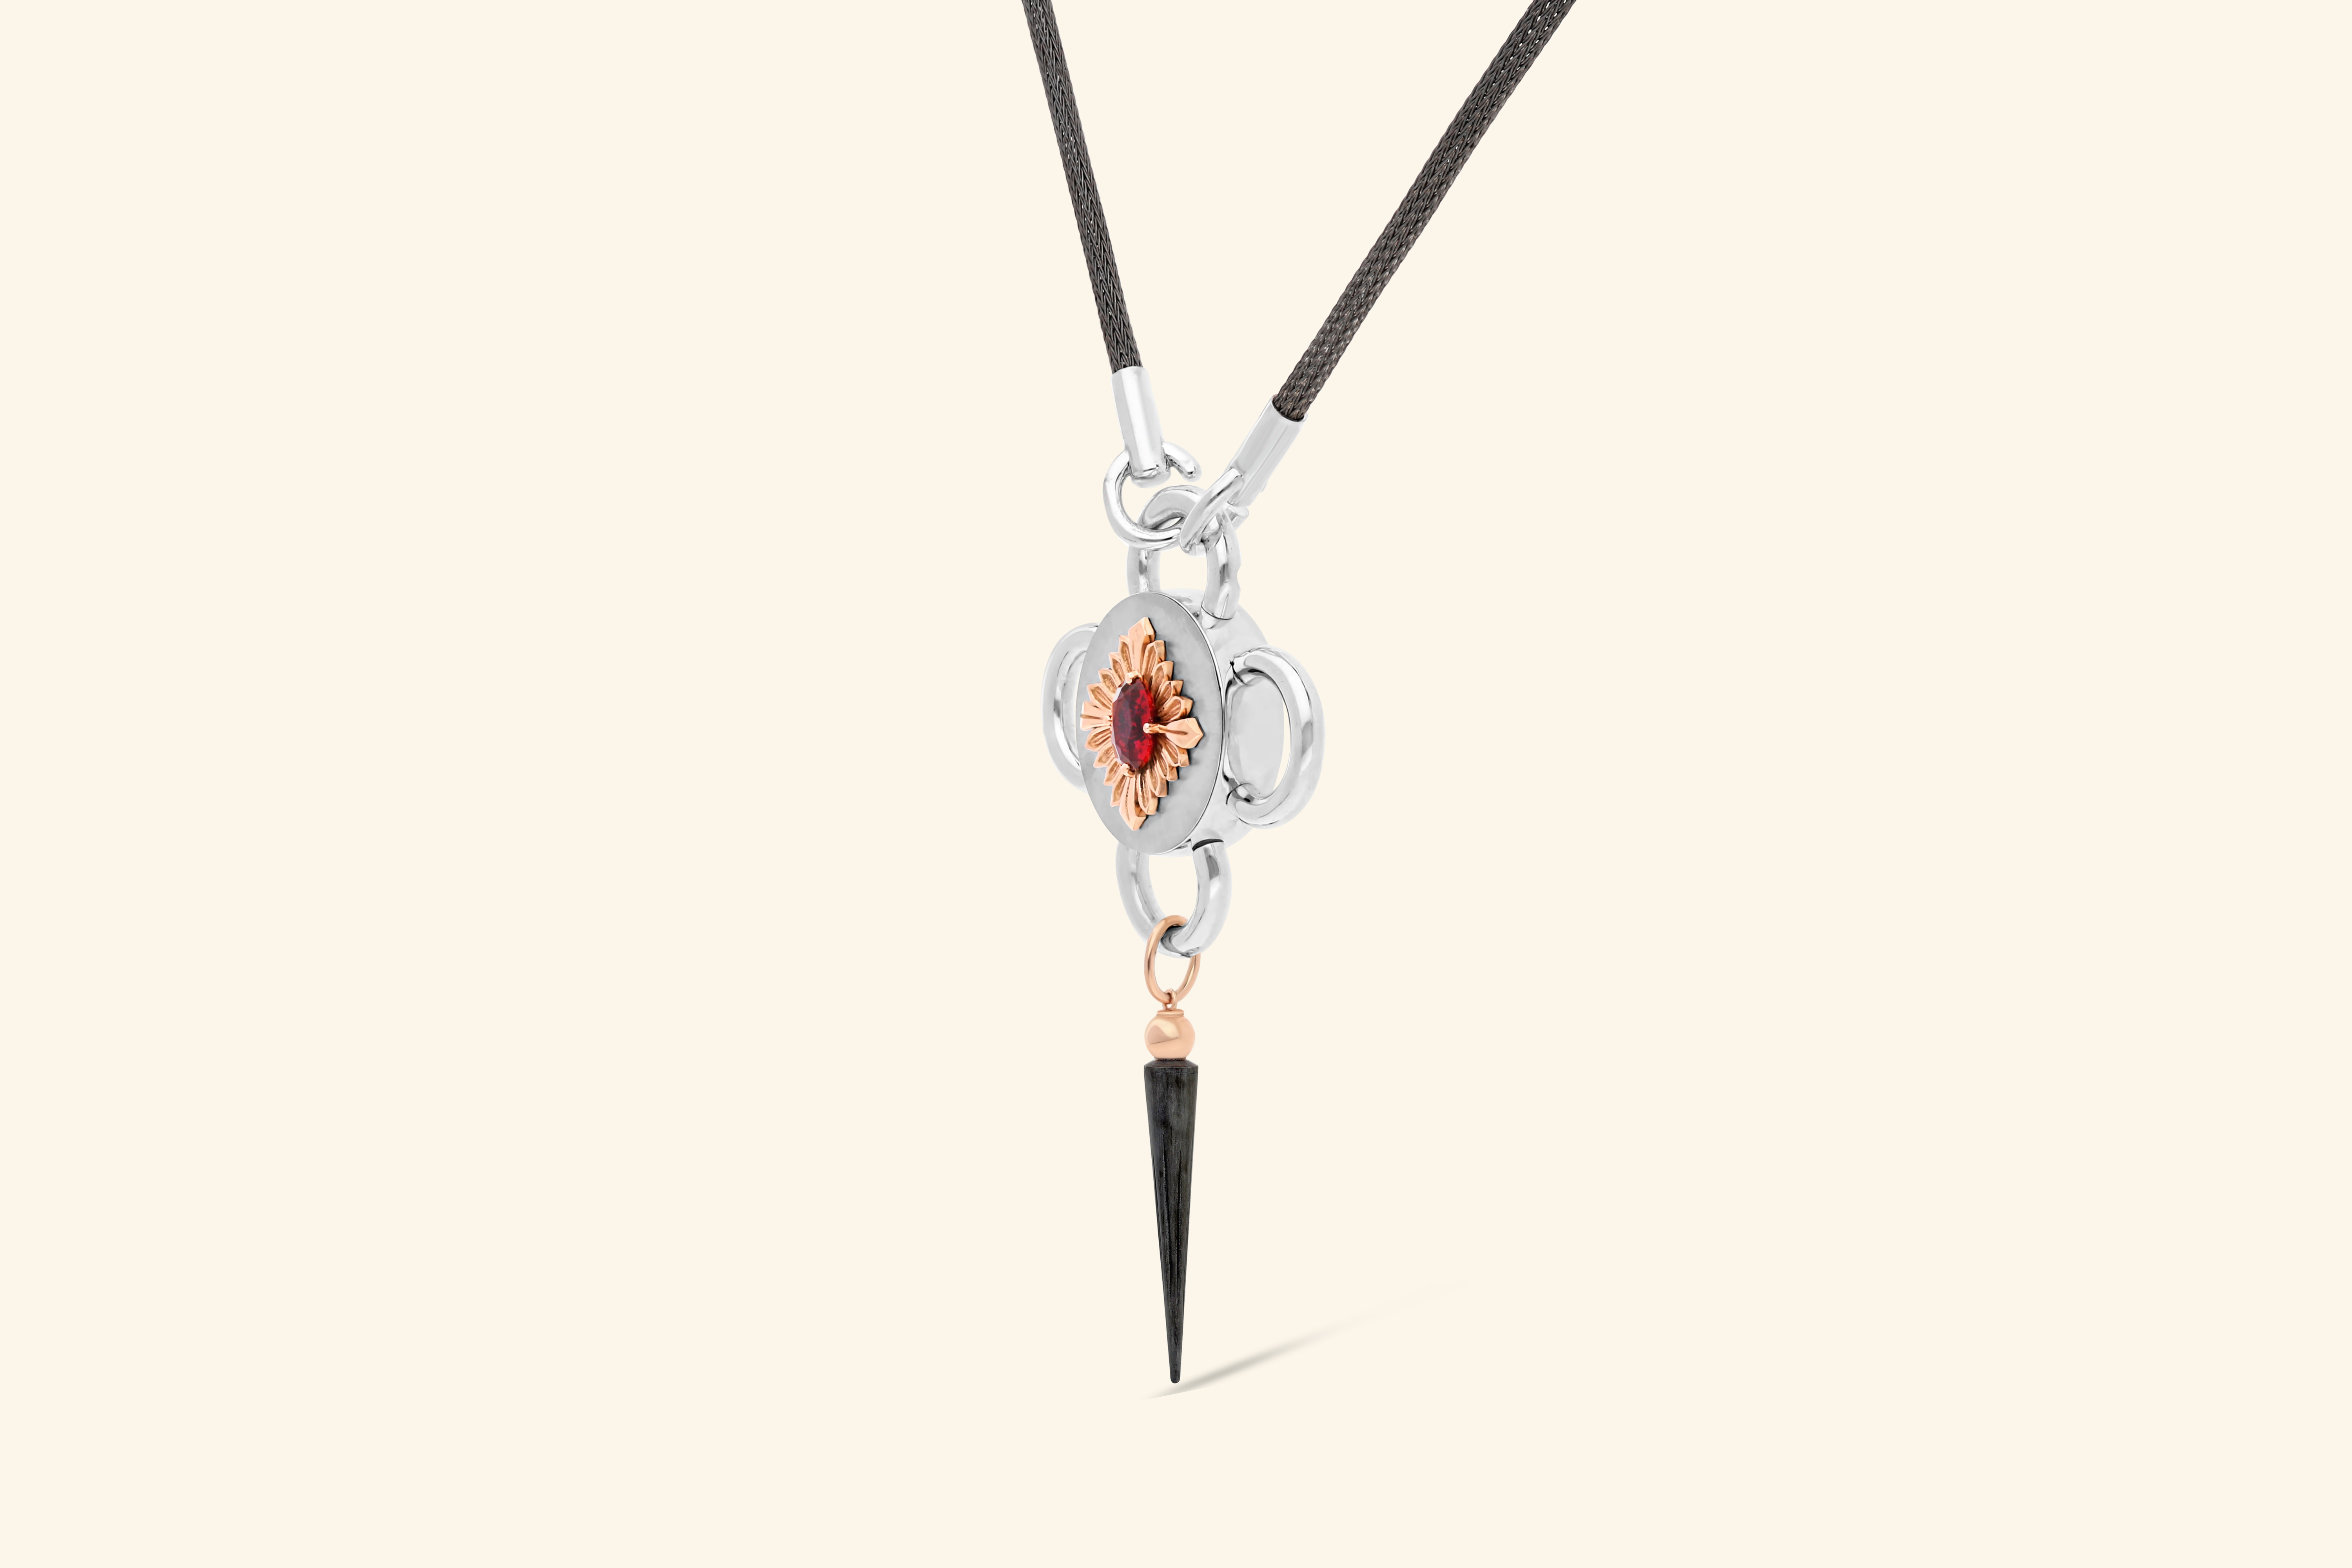 Bolt necklaceA ~1.79-carat rubellite set with a polished rose gold flower on a satin-finish silver disk . A tassel in rose gold and blackened silver. Knitted chain in blackened silver.